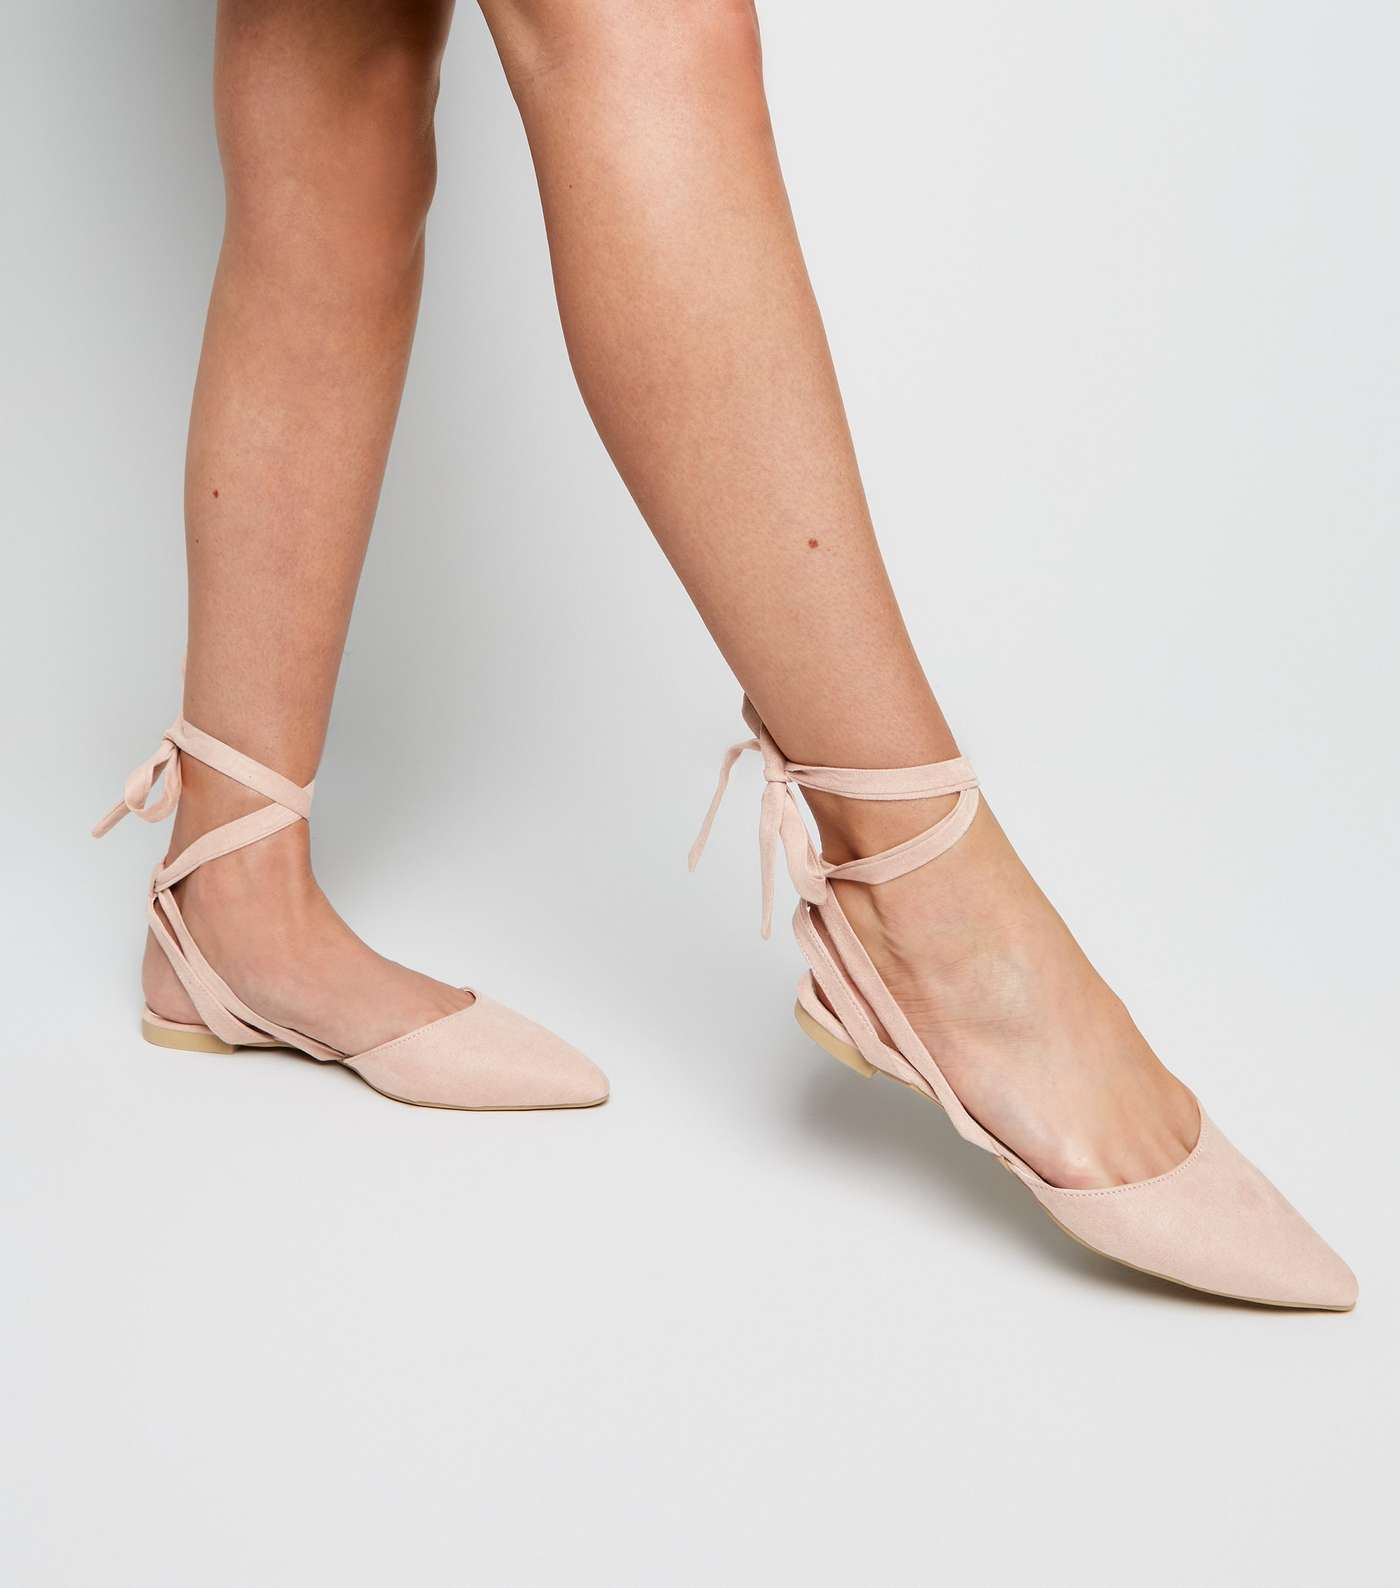 Pink Suedette Pointed Ankle Tie Pumps Image 2